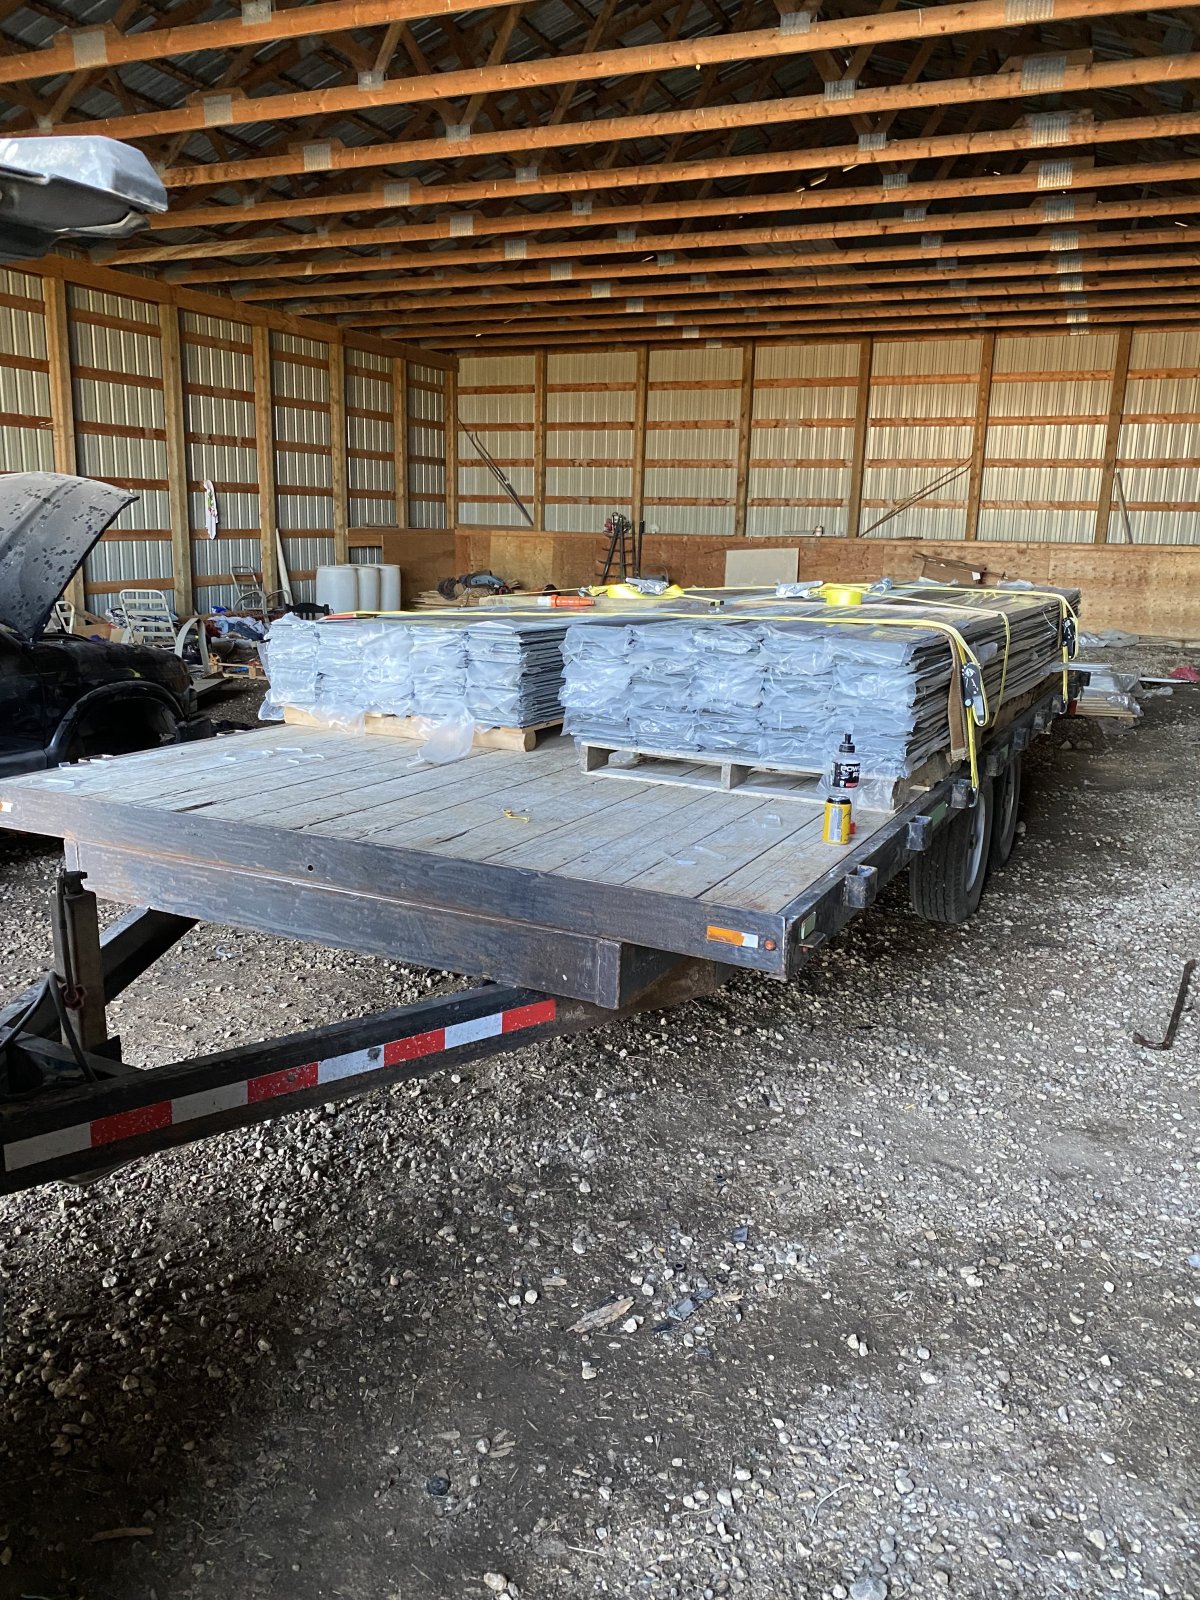 A stolen trailer was one of many items found at a property in the RM of Lac du Bonnet.